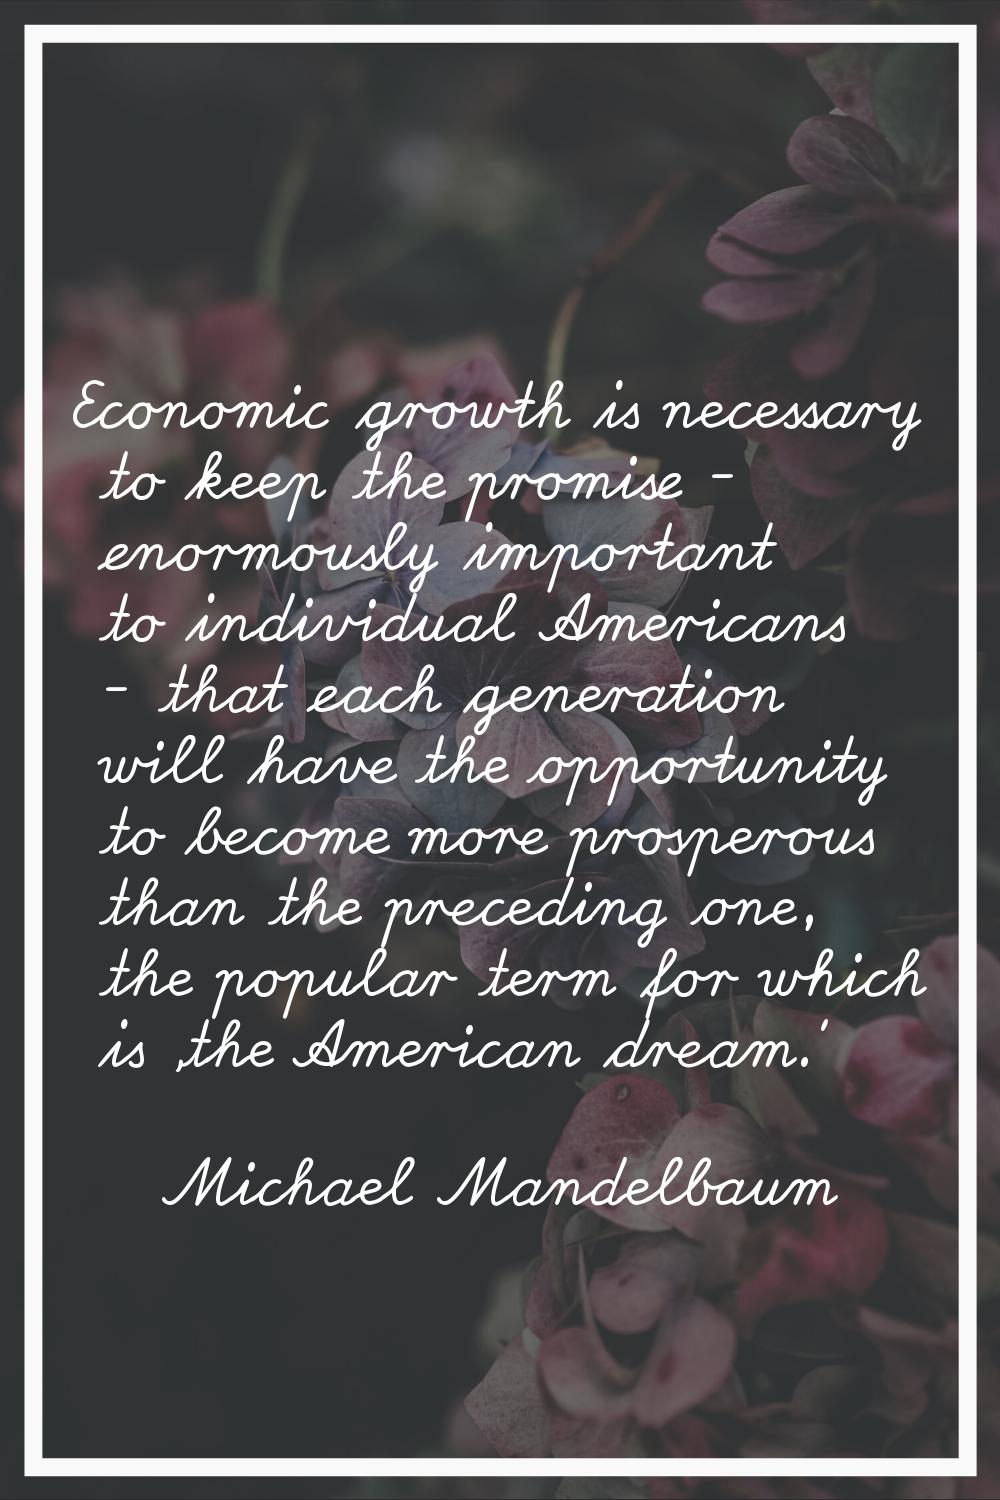 Economic growth is necessary to keep the promise - enormously important to individual Americans - t